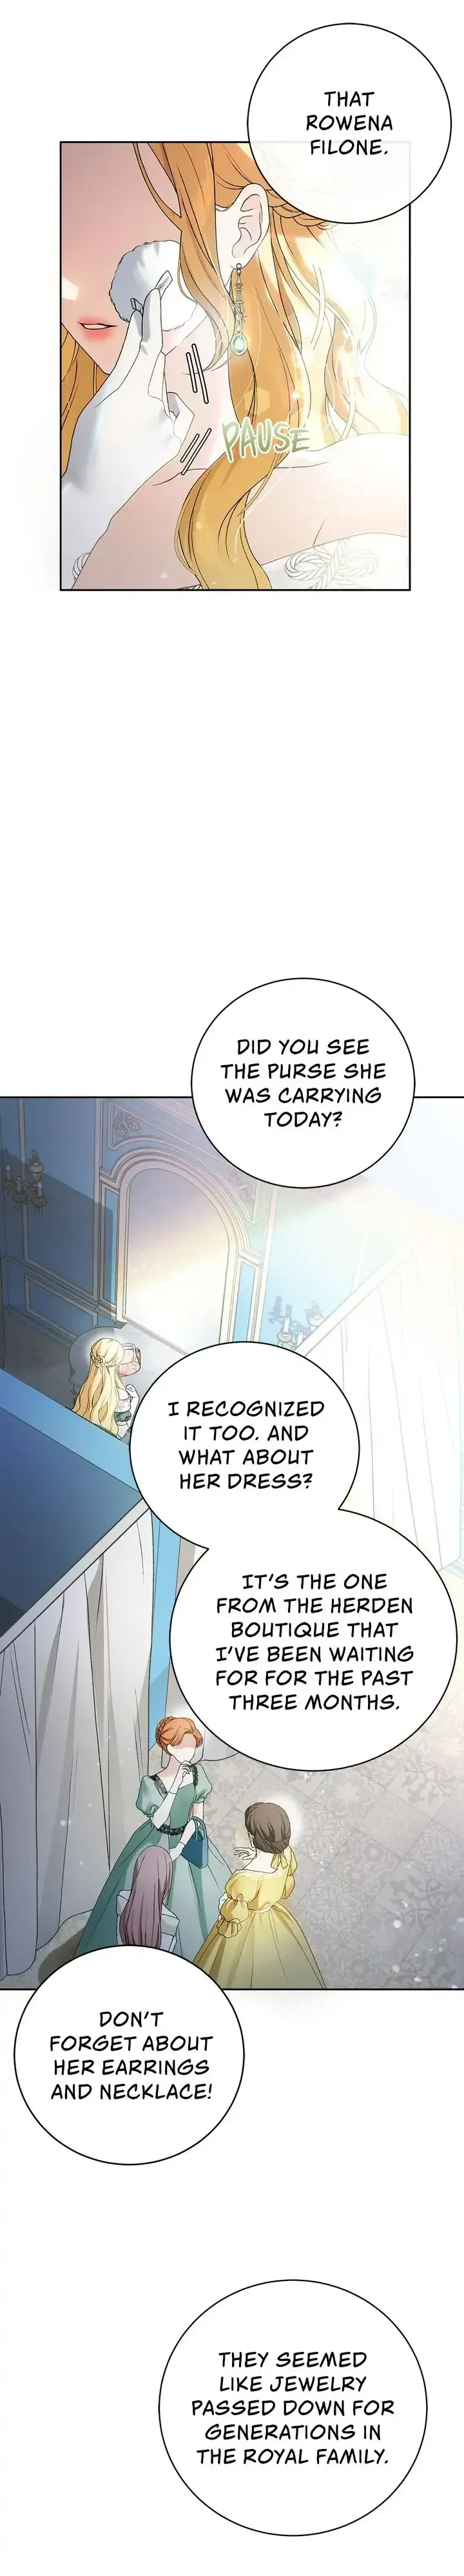 The Mistress Runs Away Chapter 1 page 3